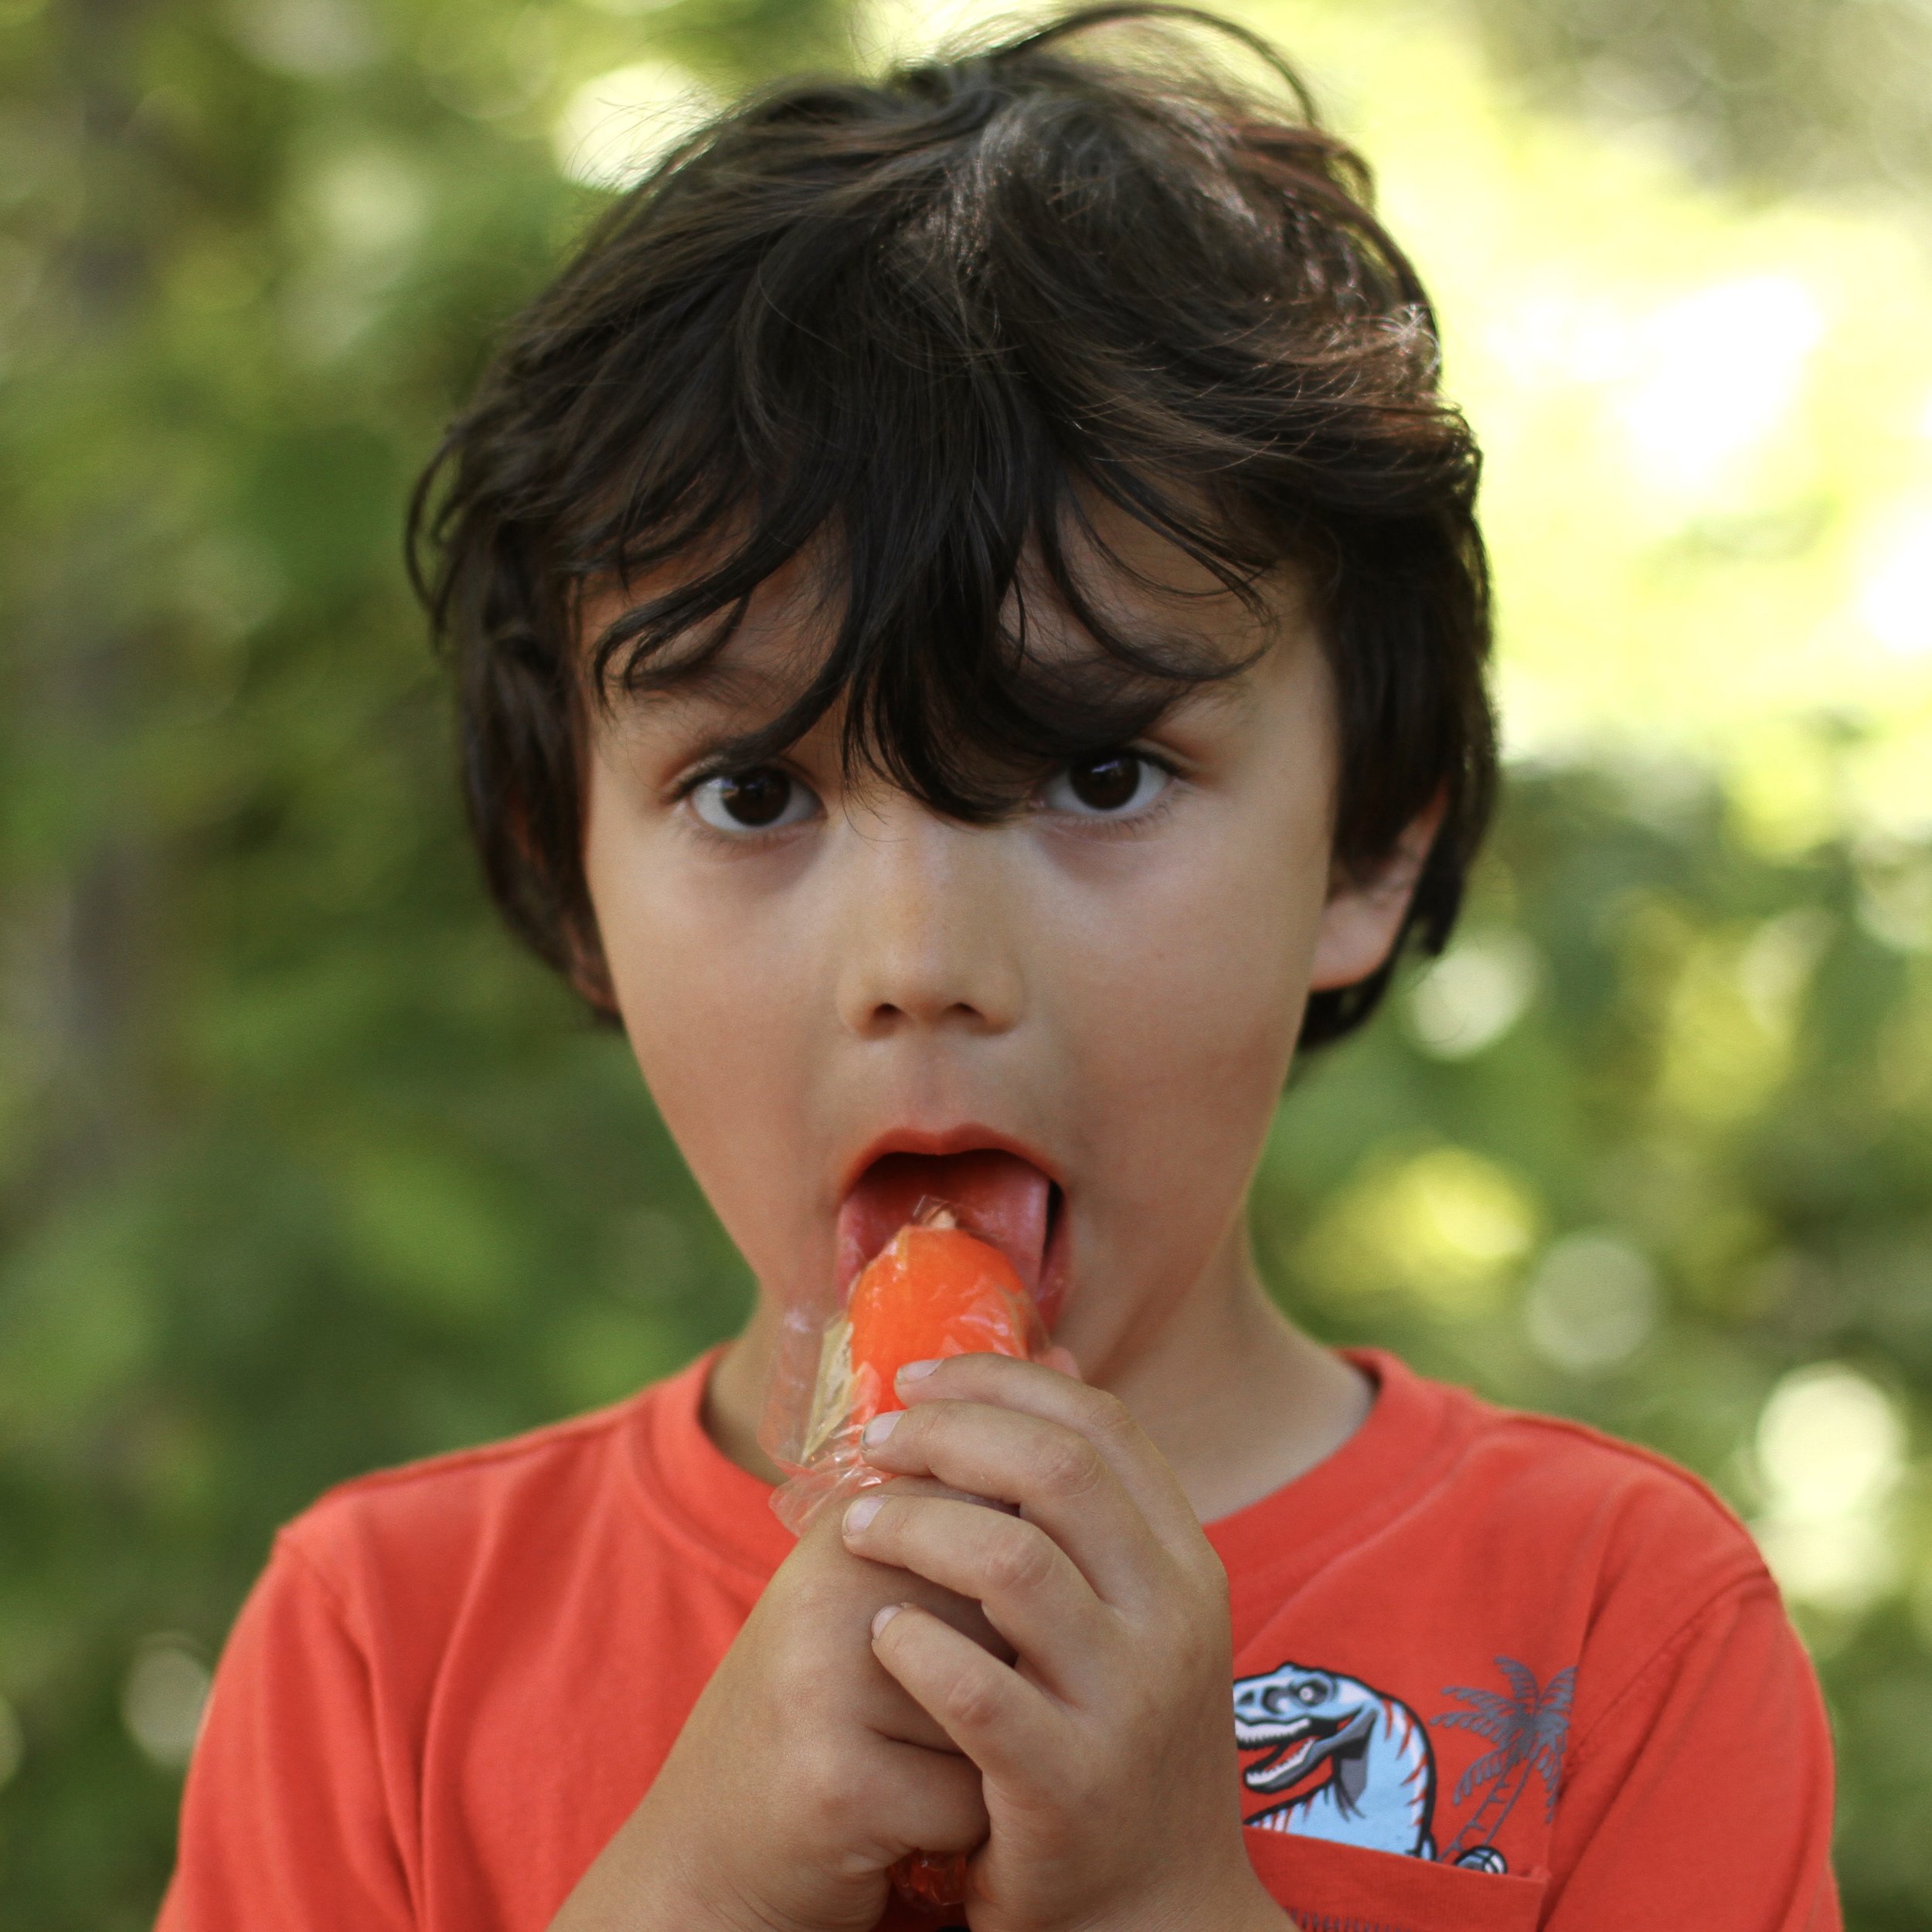 Young student with short brown hair licking popsicle